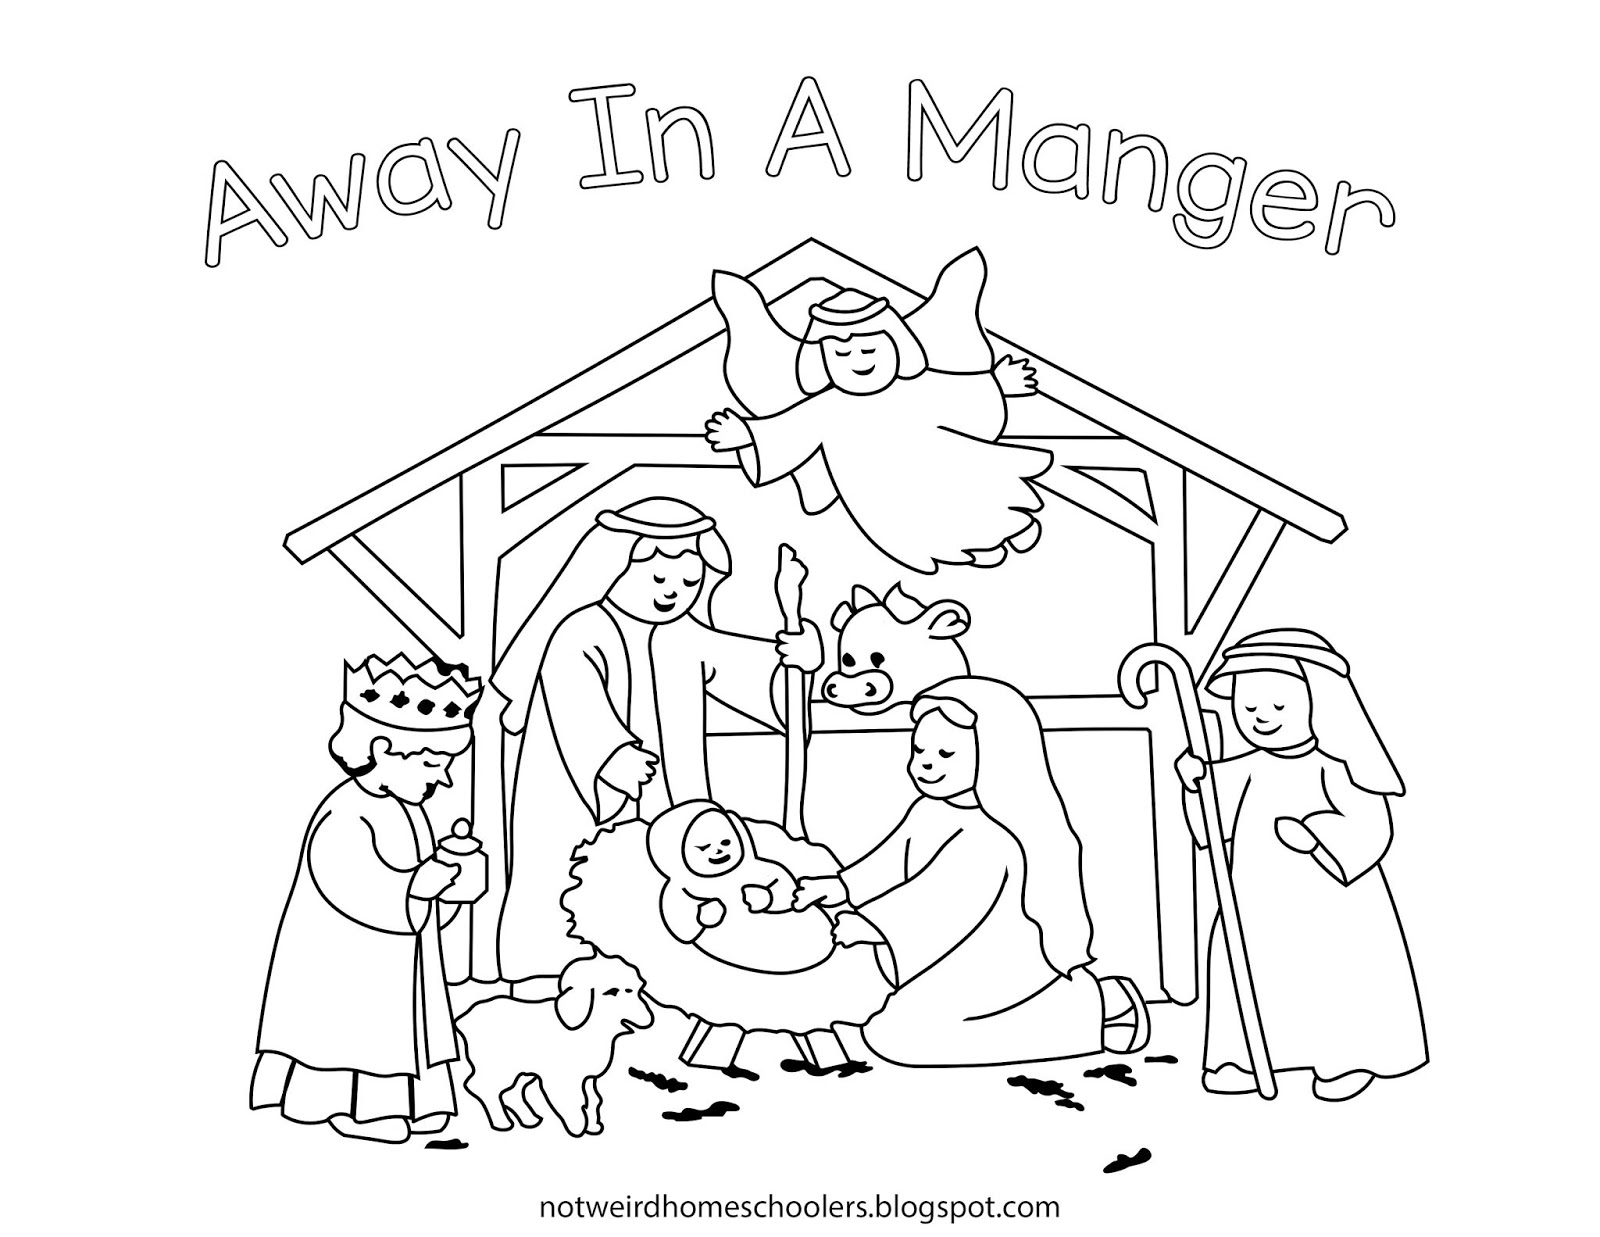 free-homeschooling-resource-nativity-scene-coloring-page